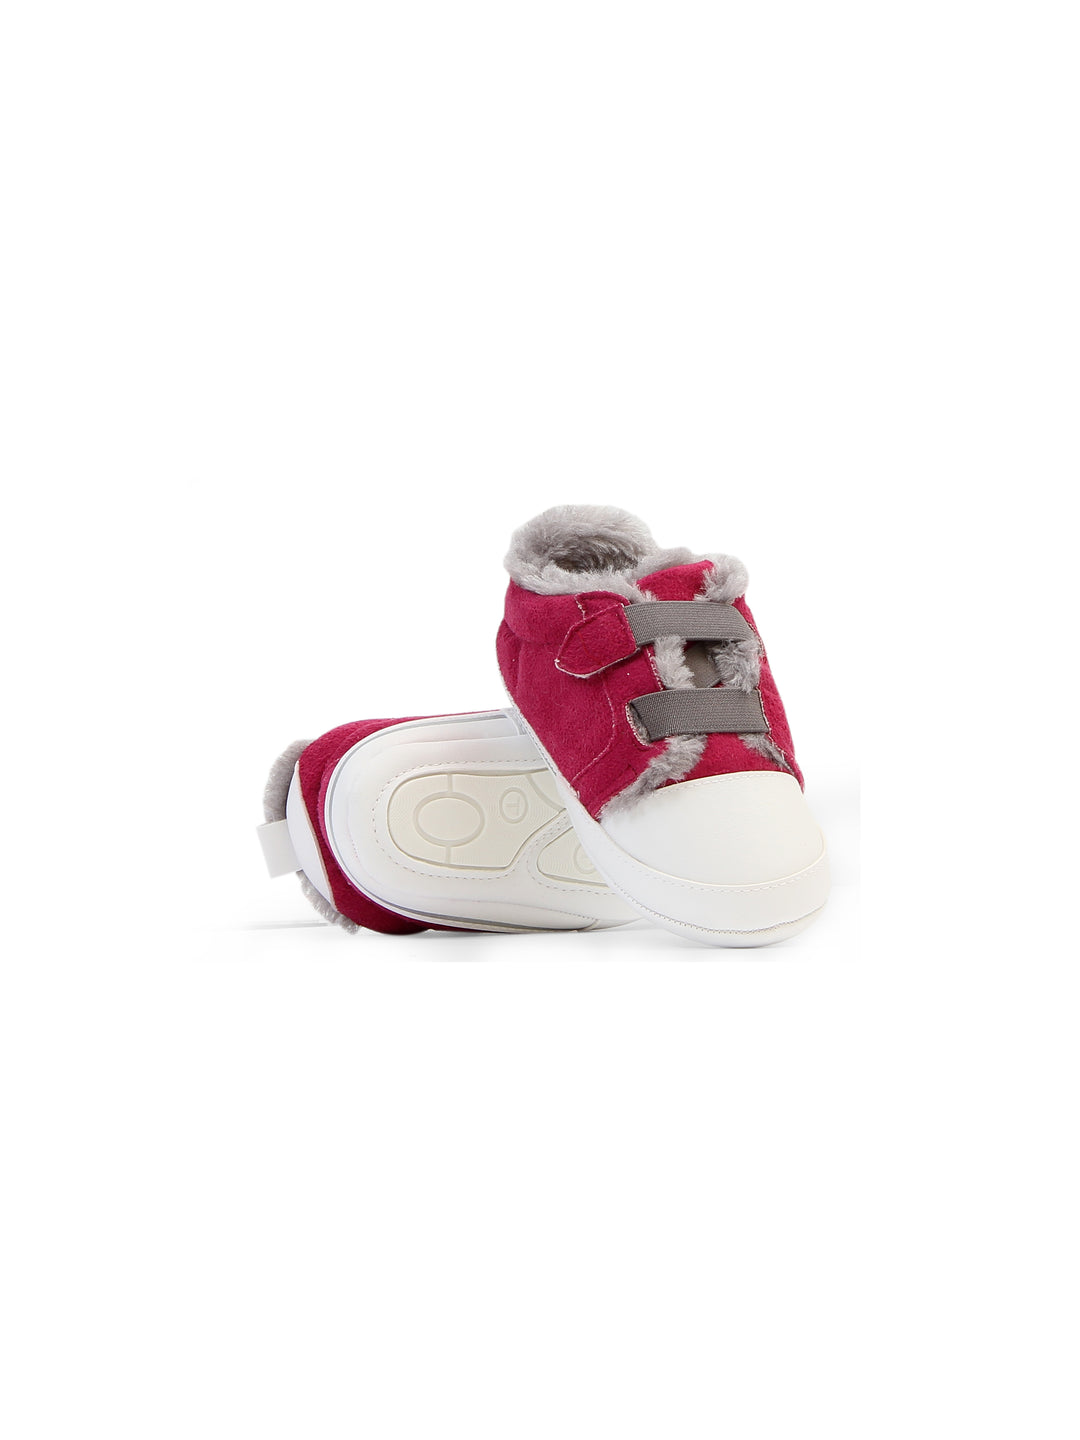 Funny Baby Canvas Shoes #3093 (W-22)